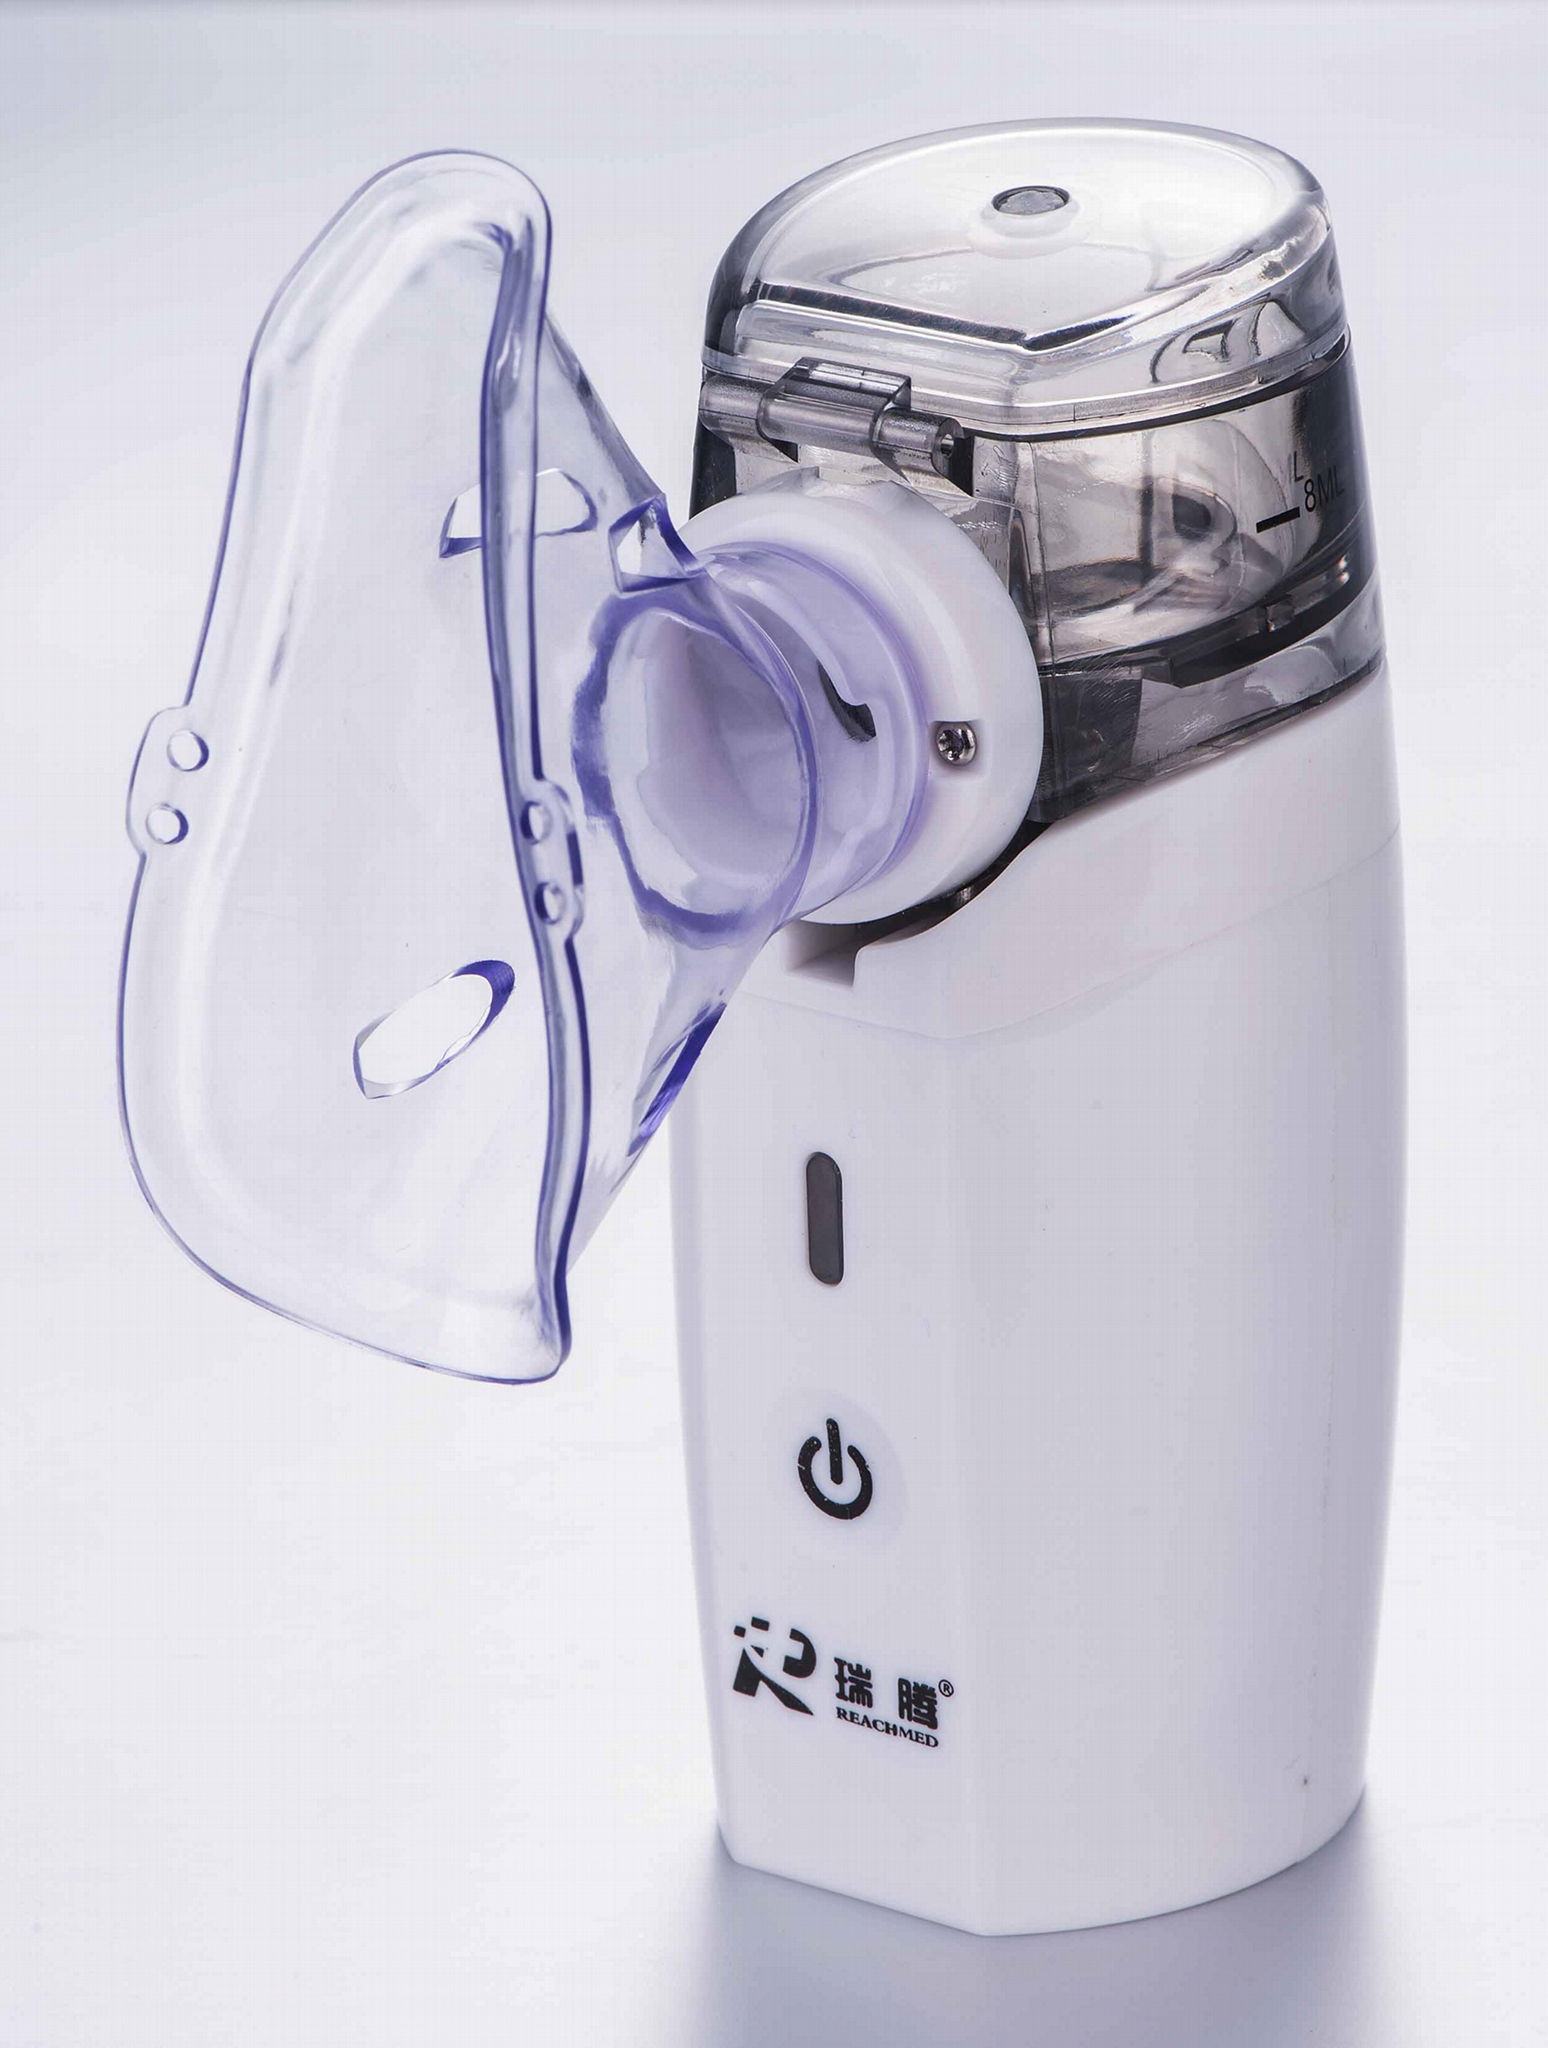 2019 Hot Sale CE Approved Portable Ultrasonic Mesh Nebulizer Machine for baby us 3